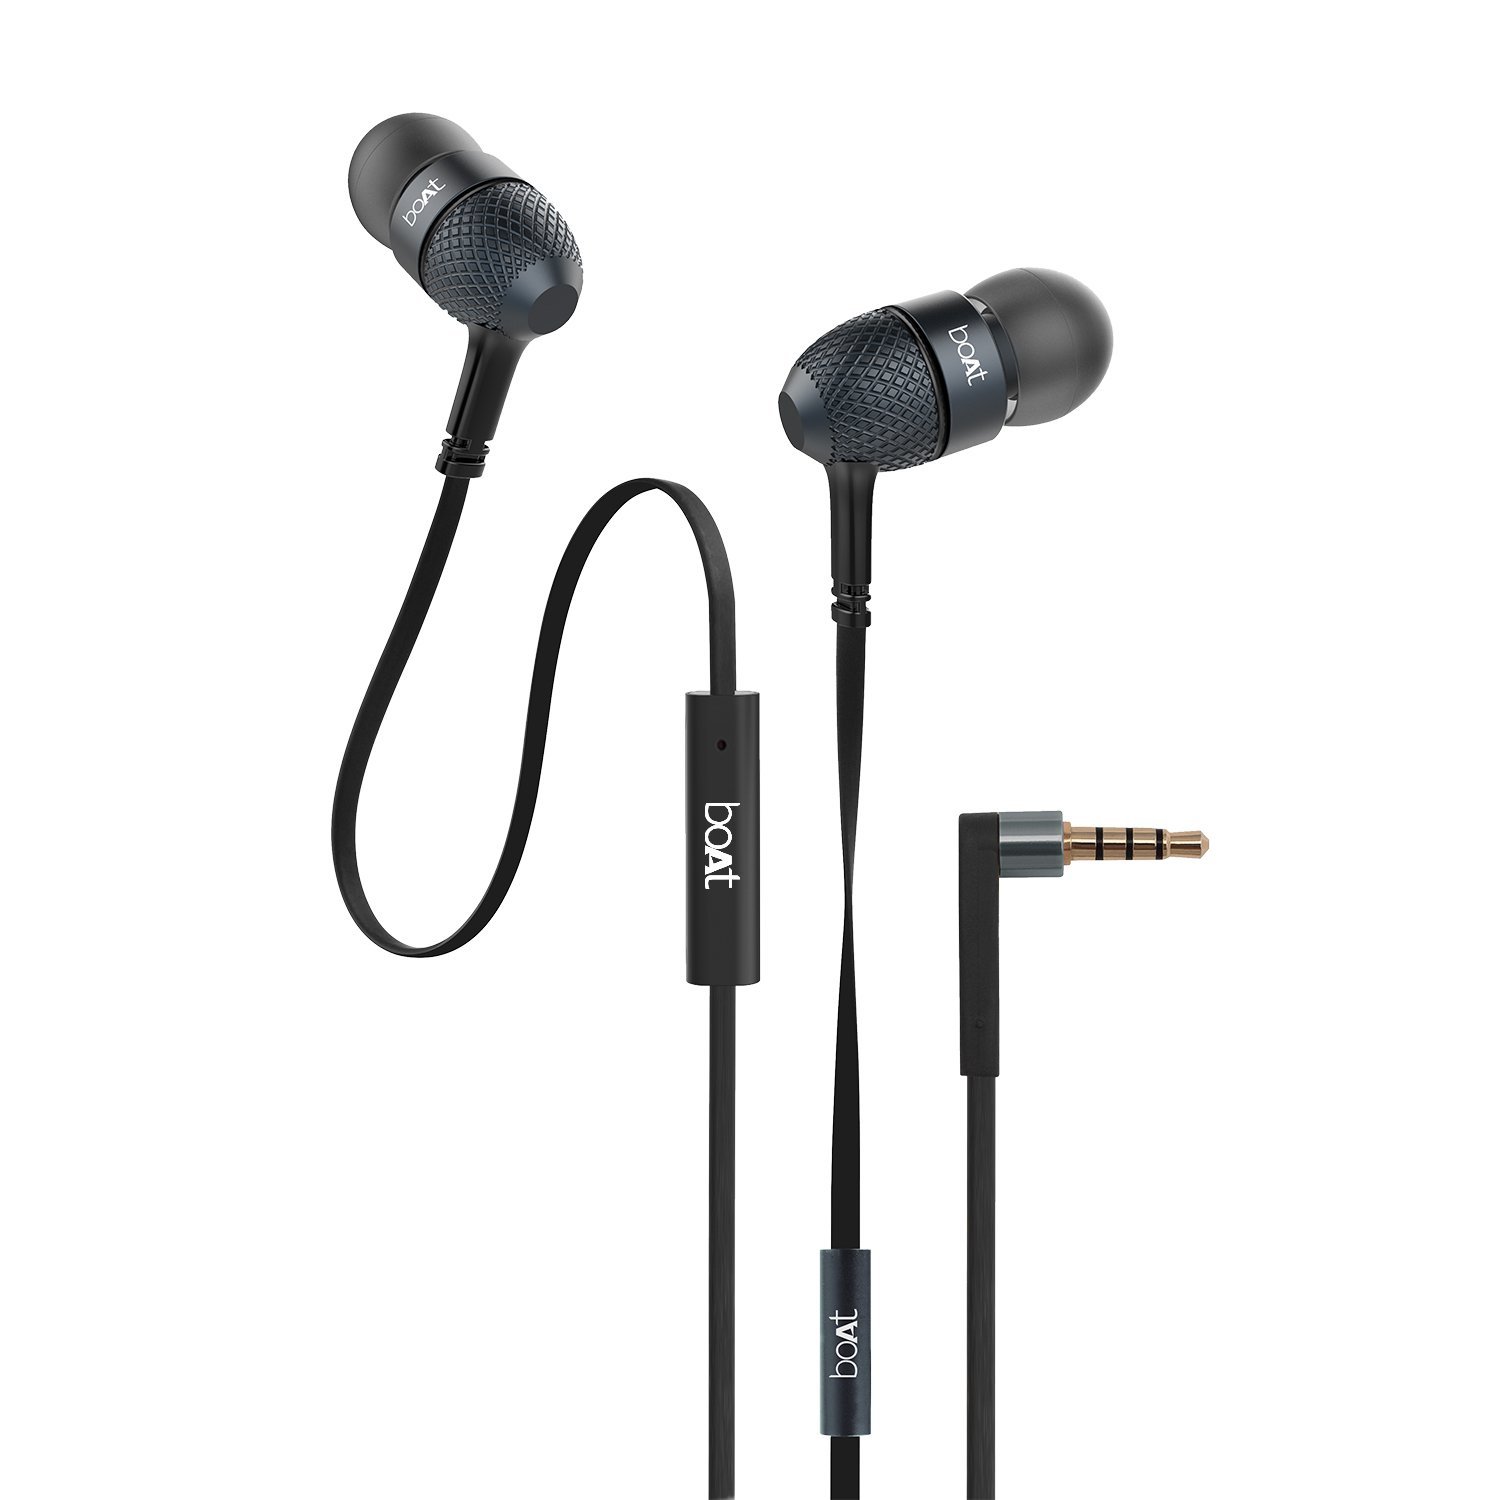 Amazon Offers – Boat BassHeads 225 in-Ear Super Extra Bass Headphones (Black) @ Rs. 549